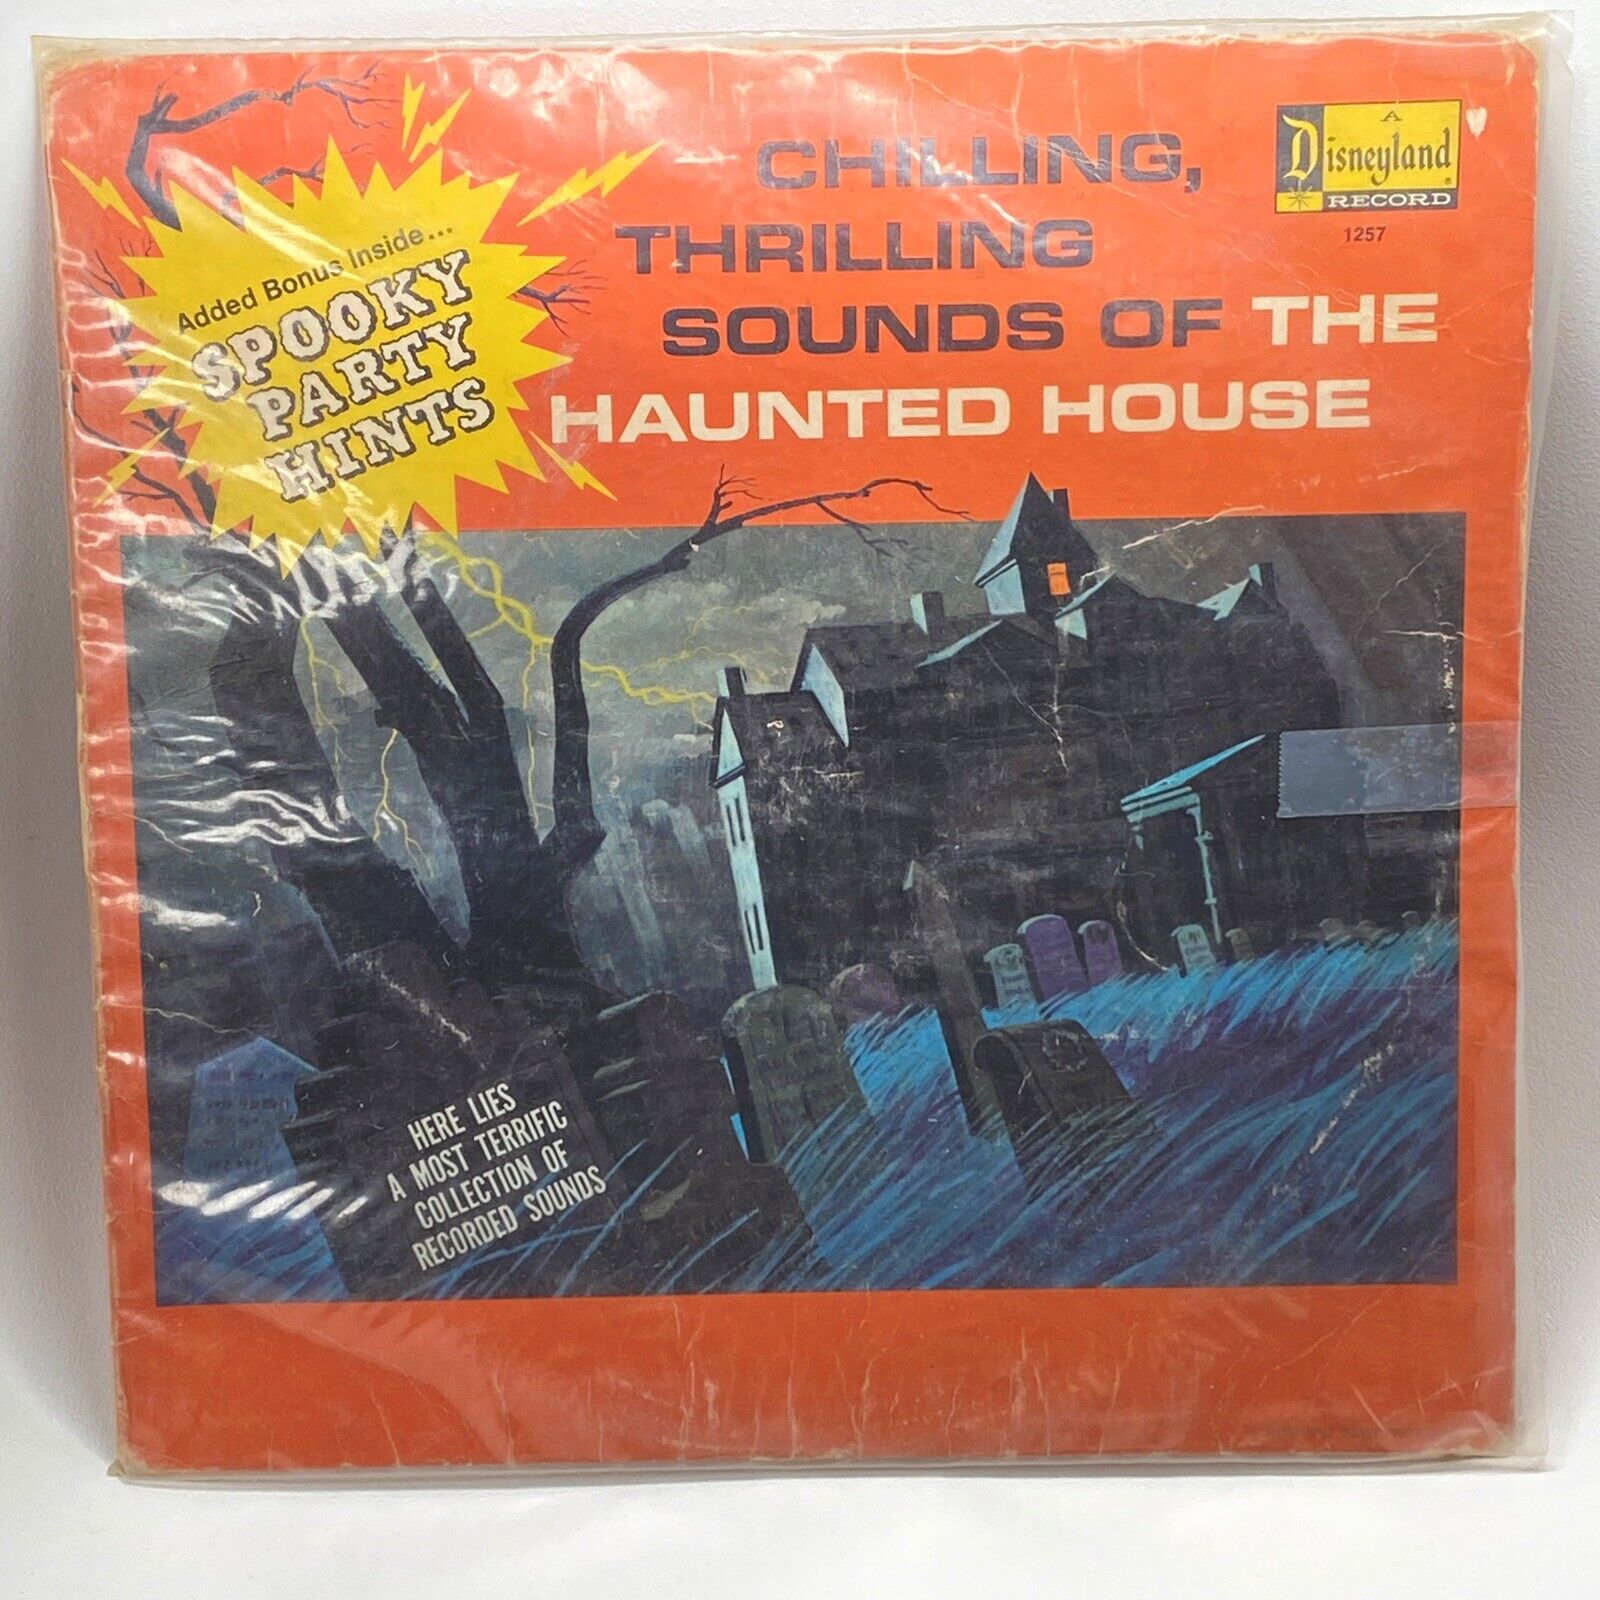 1964 Chilling, Thrilling Sounds Of The Haunted House - Disney DQ-1257 HALLOWEEN